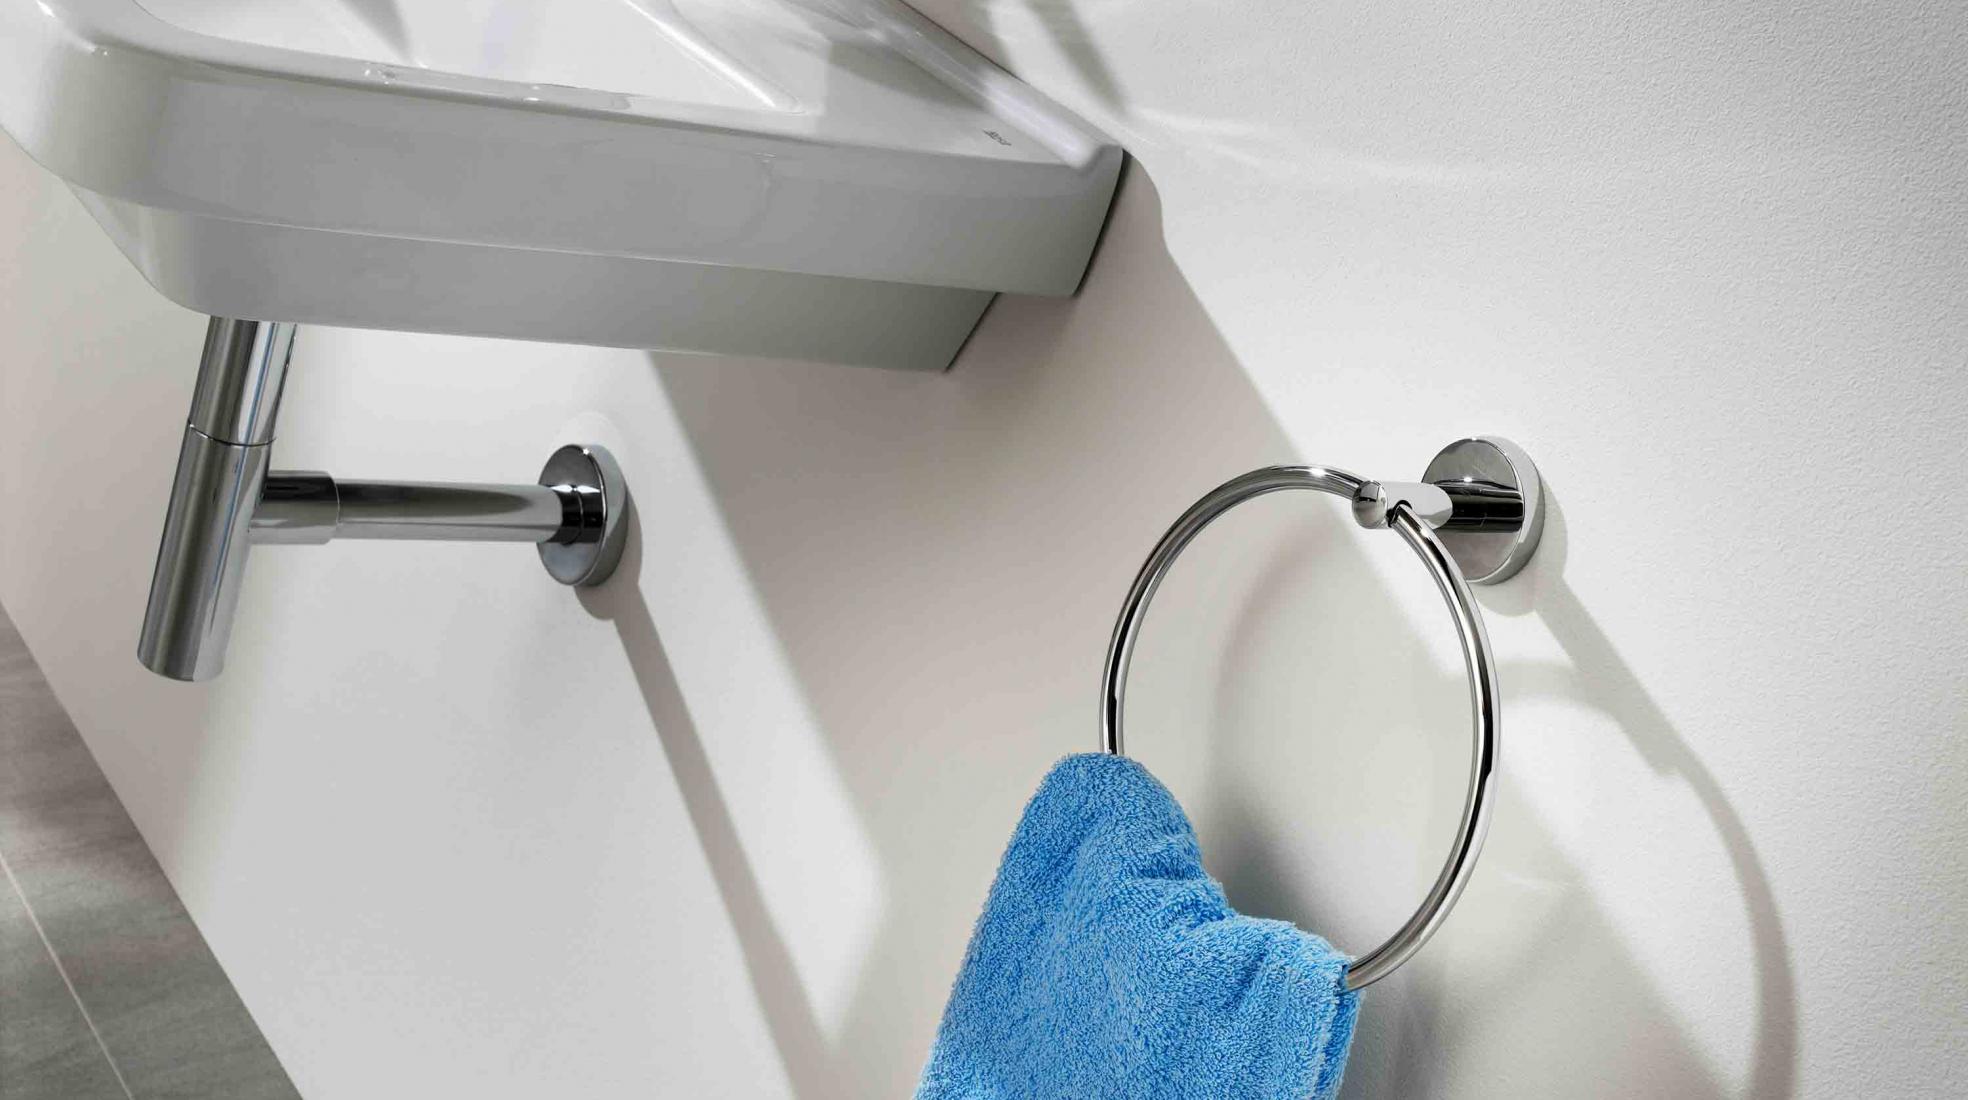 Discover why you should choose stick-on bathroom hooks and accessories